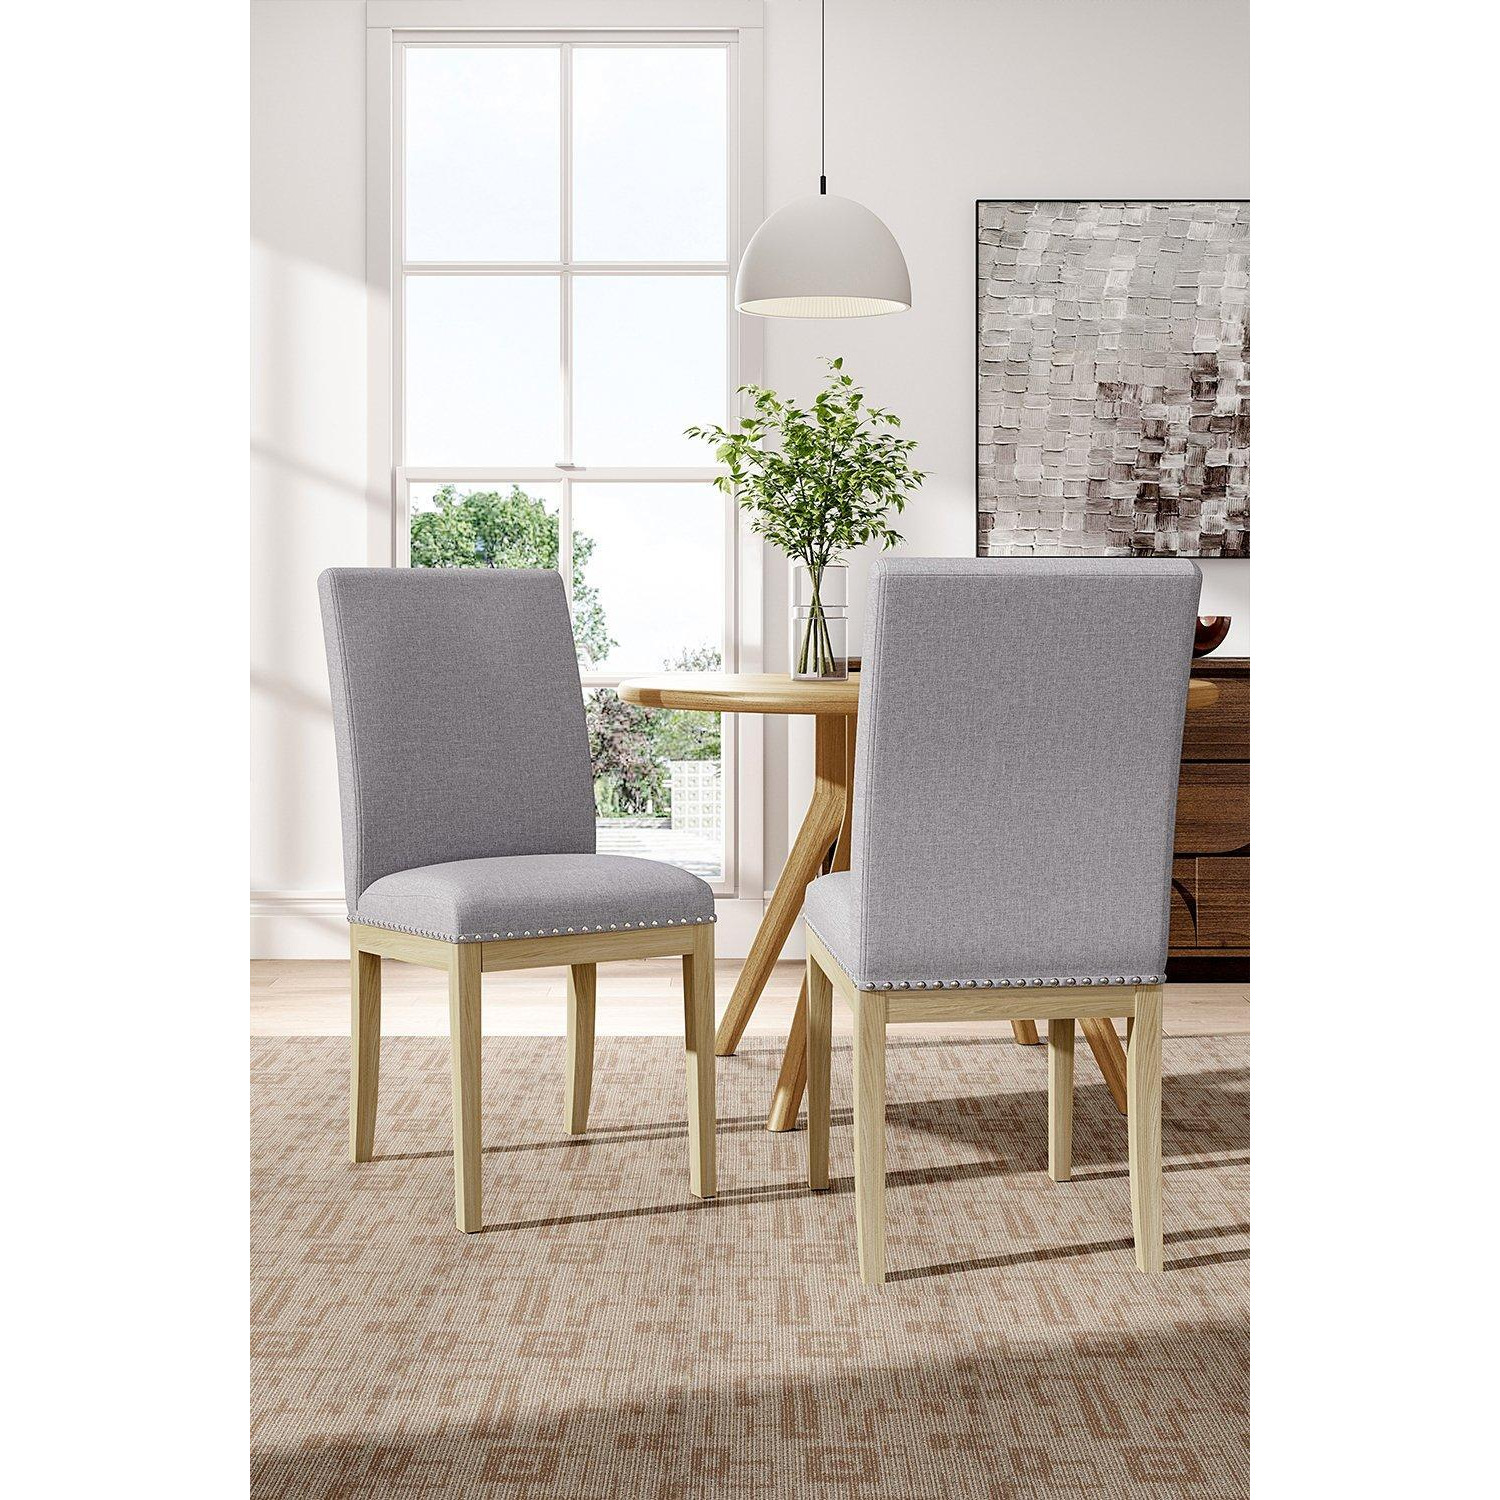 2Pcs Modern Upholstered Dining Chairs with Nailed Trim - image 1